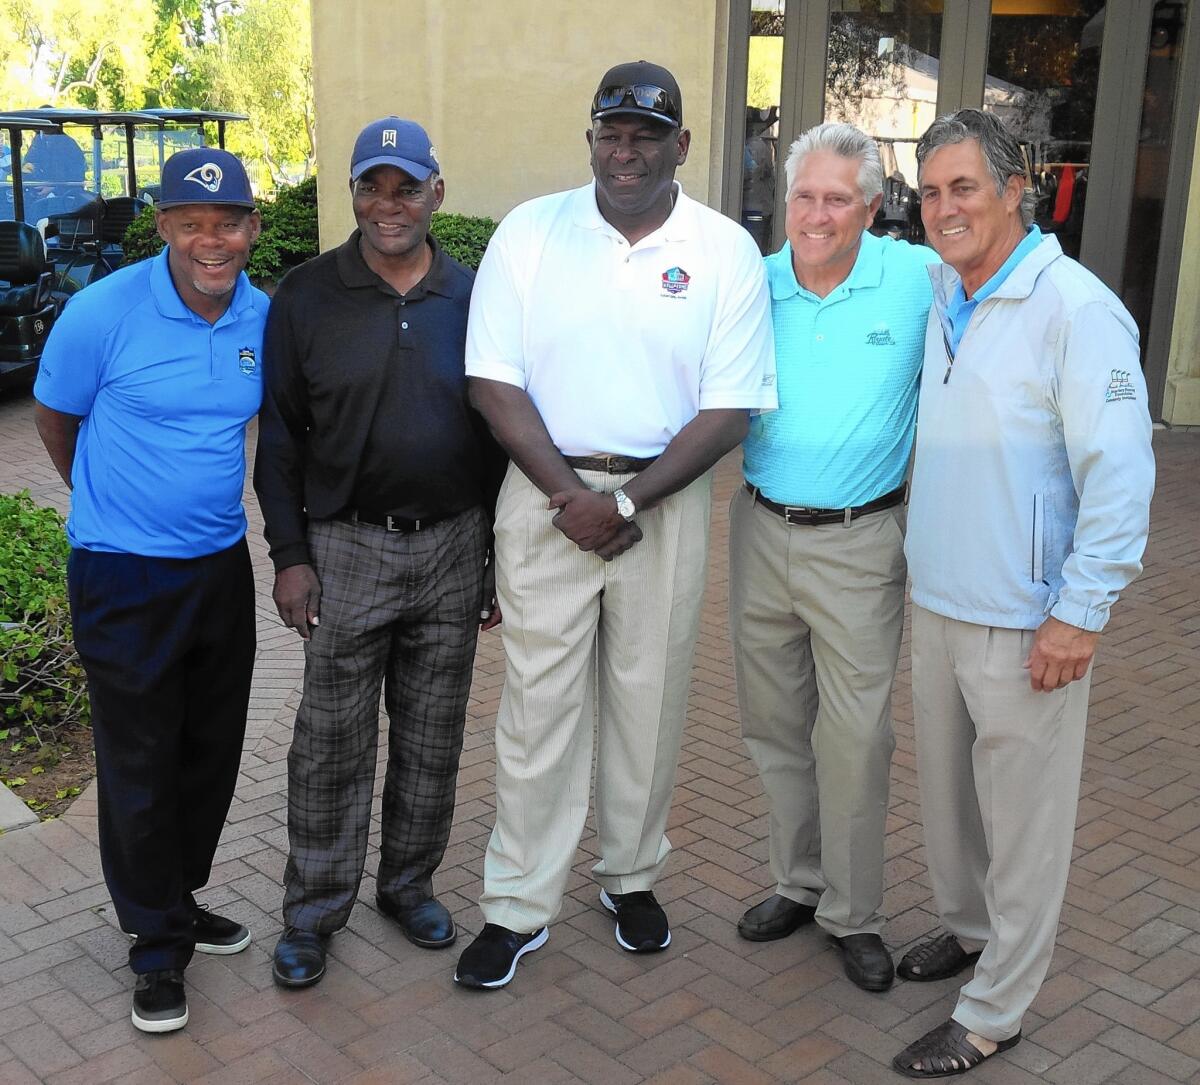 From left, former Rams LeRoy Irvin, Lawrence McCutcheon, Jackie Slater, Nolan Cromwell and Vince Ferragamo participate in the Rich Saul Memorial Golf Classic in 2016.